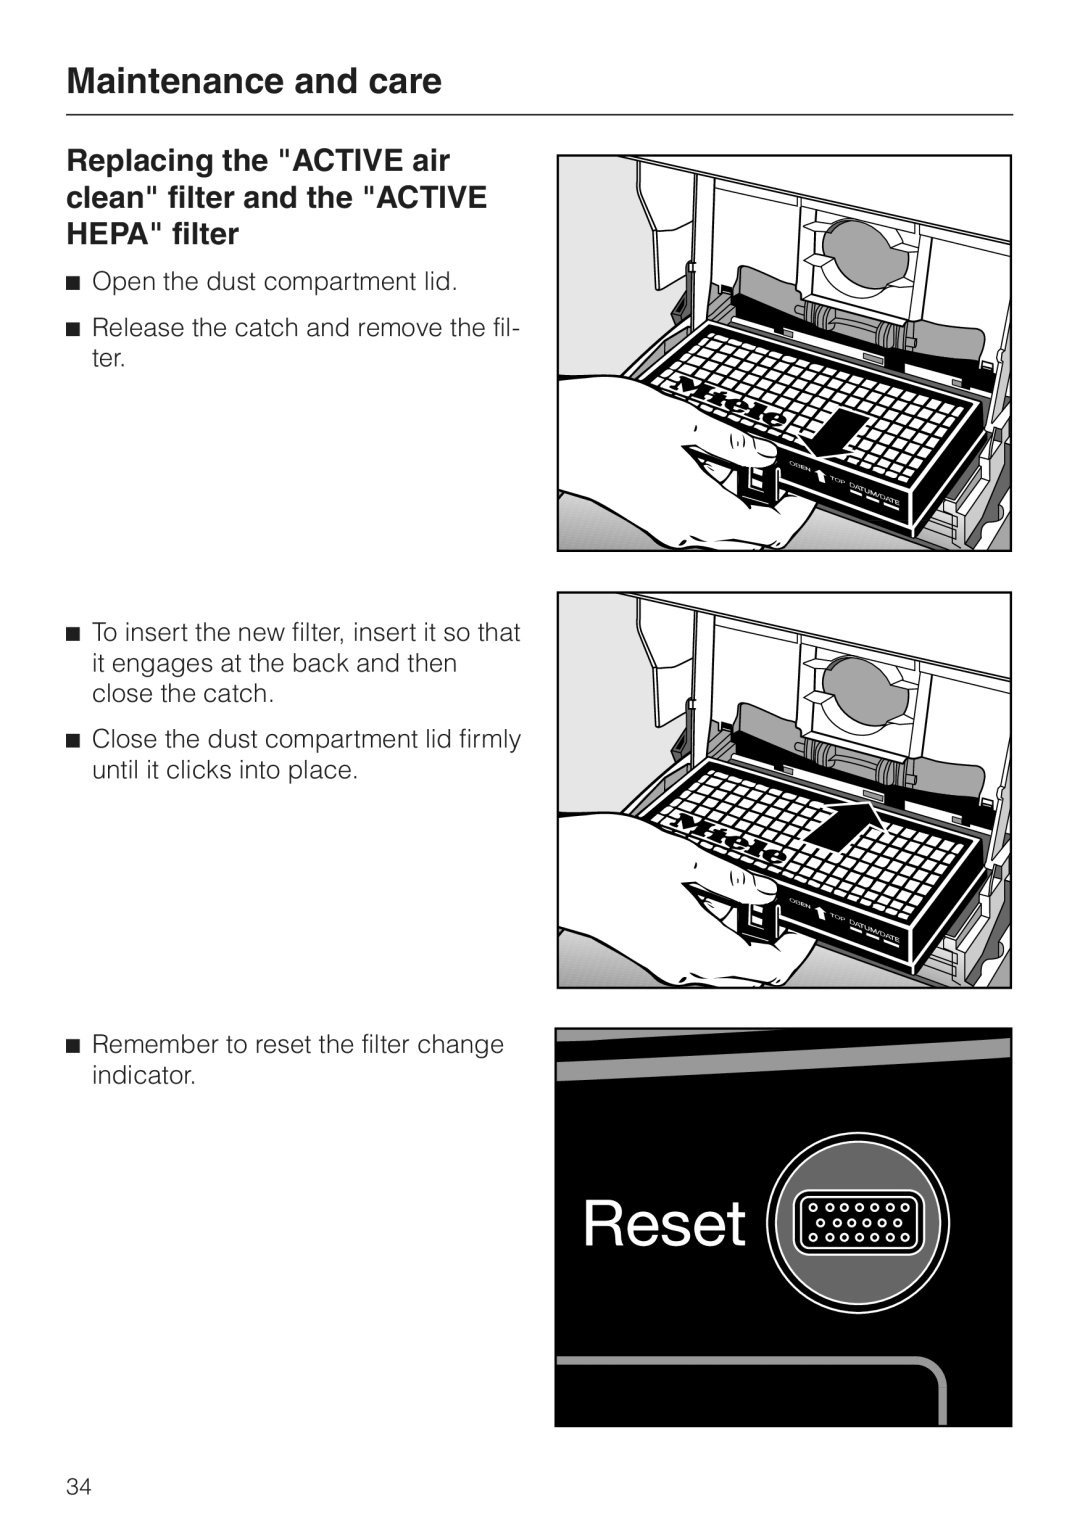 Miele S 500 - S 548 manual Maintenance and care, Open the dust compartment lid, Release the catch and remove the fil- ter 